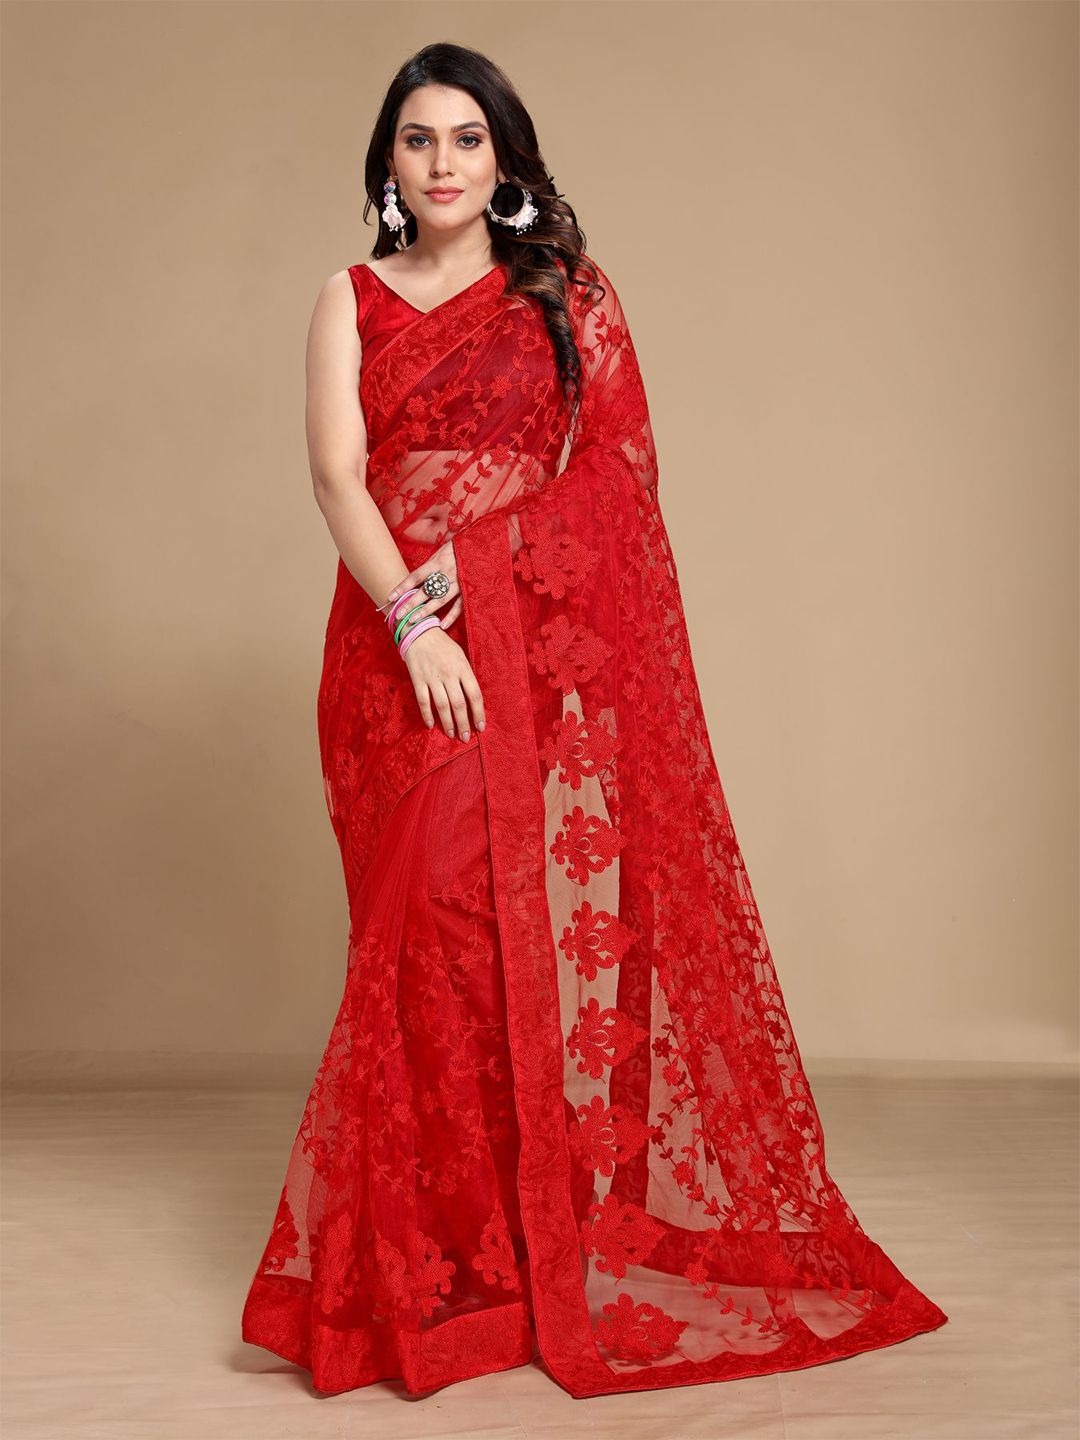 VAIRAGEE Red Embellished Net Saree Price in India